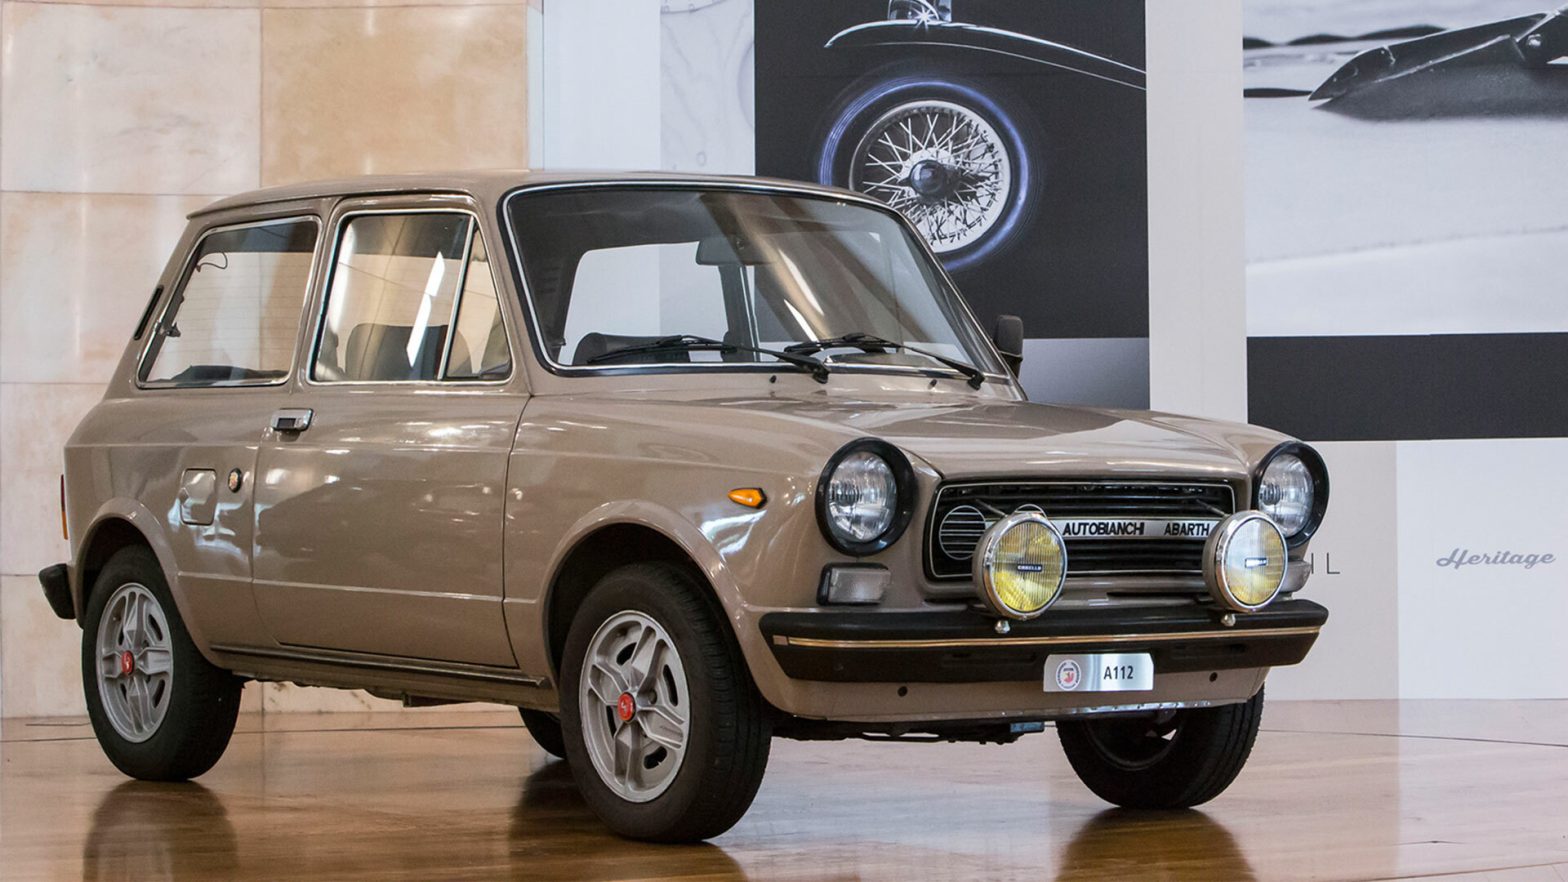 Italy Might Take Autobianchi and Innocenti Brands From Stellantis